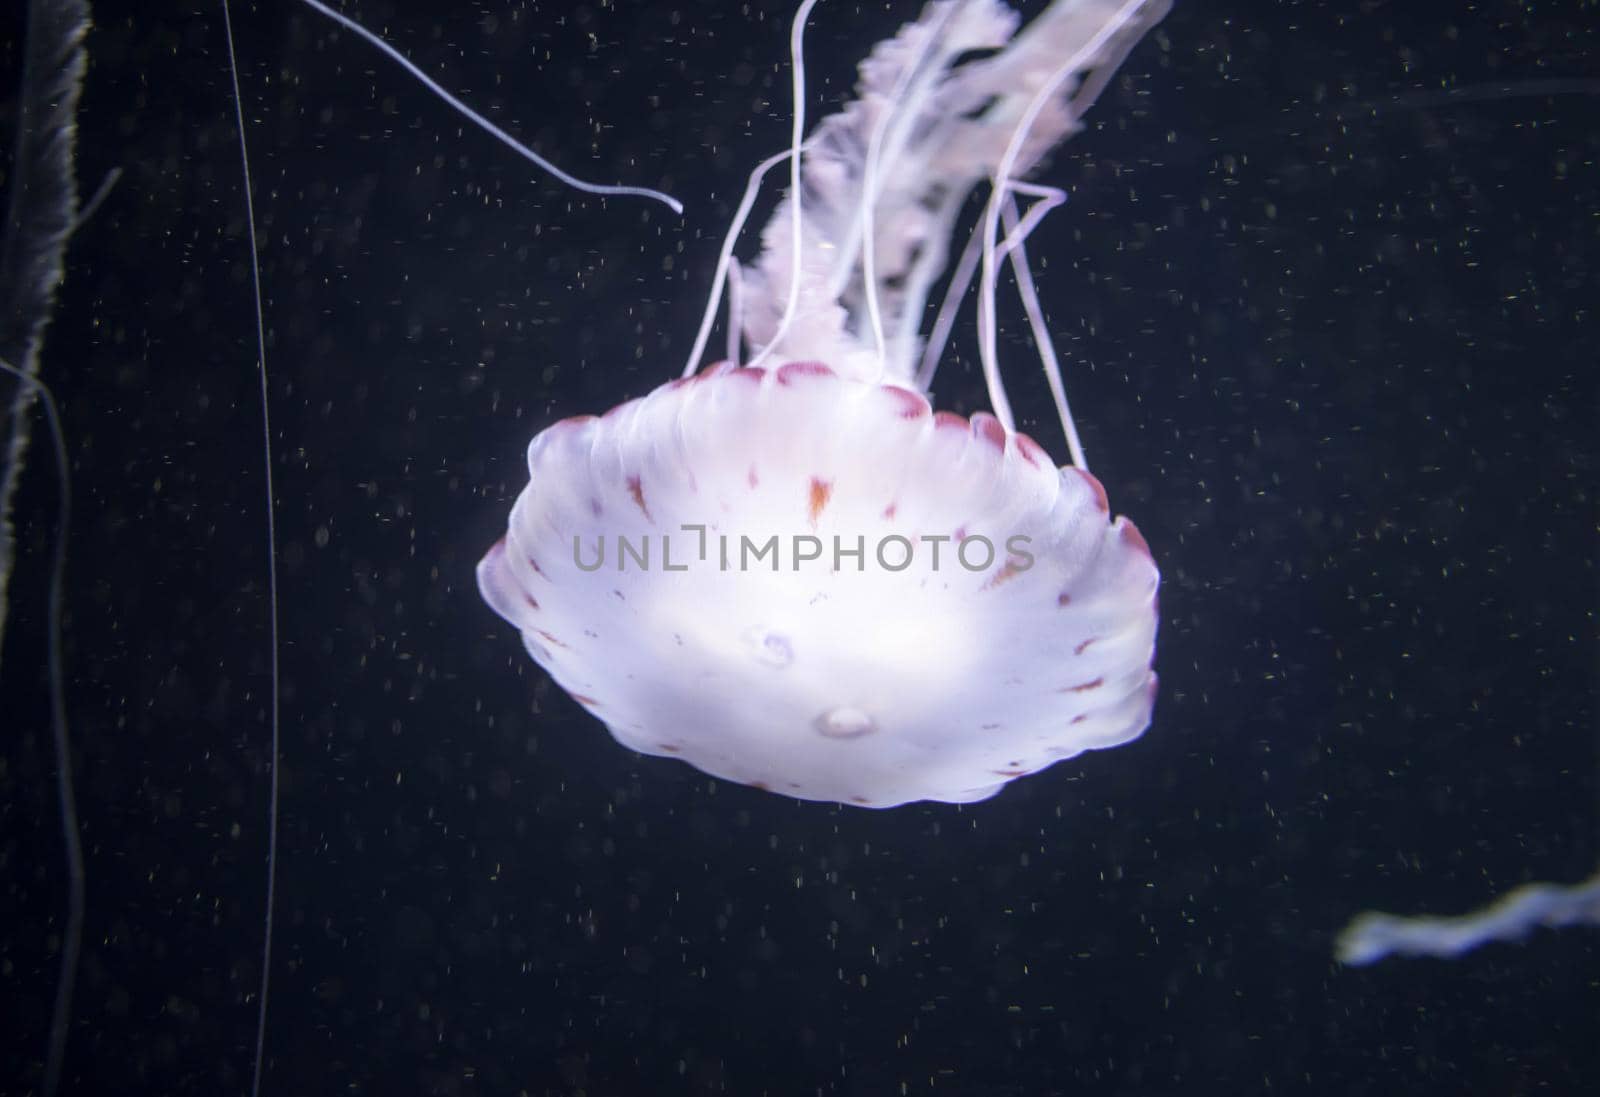 Blurry white colored jelly fishes floating on waters with long tentacles. White Pacific sea nettles